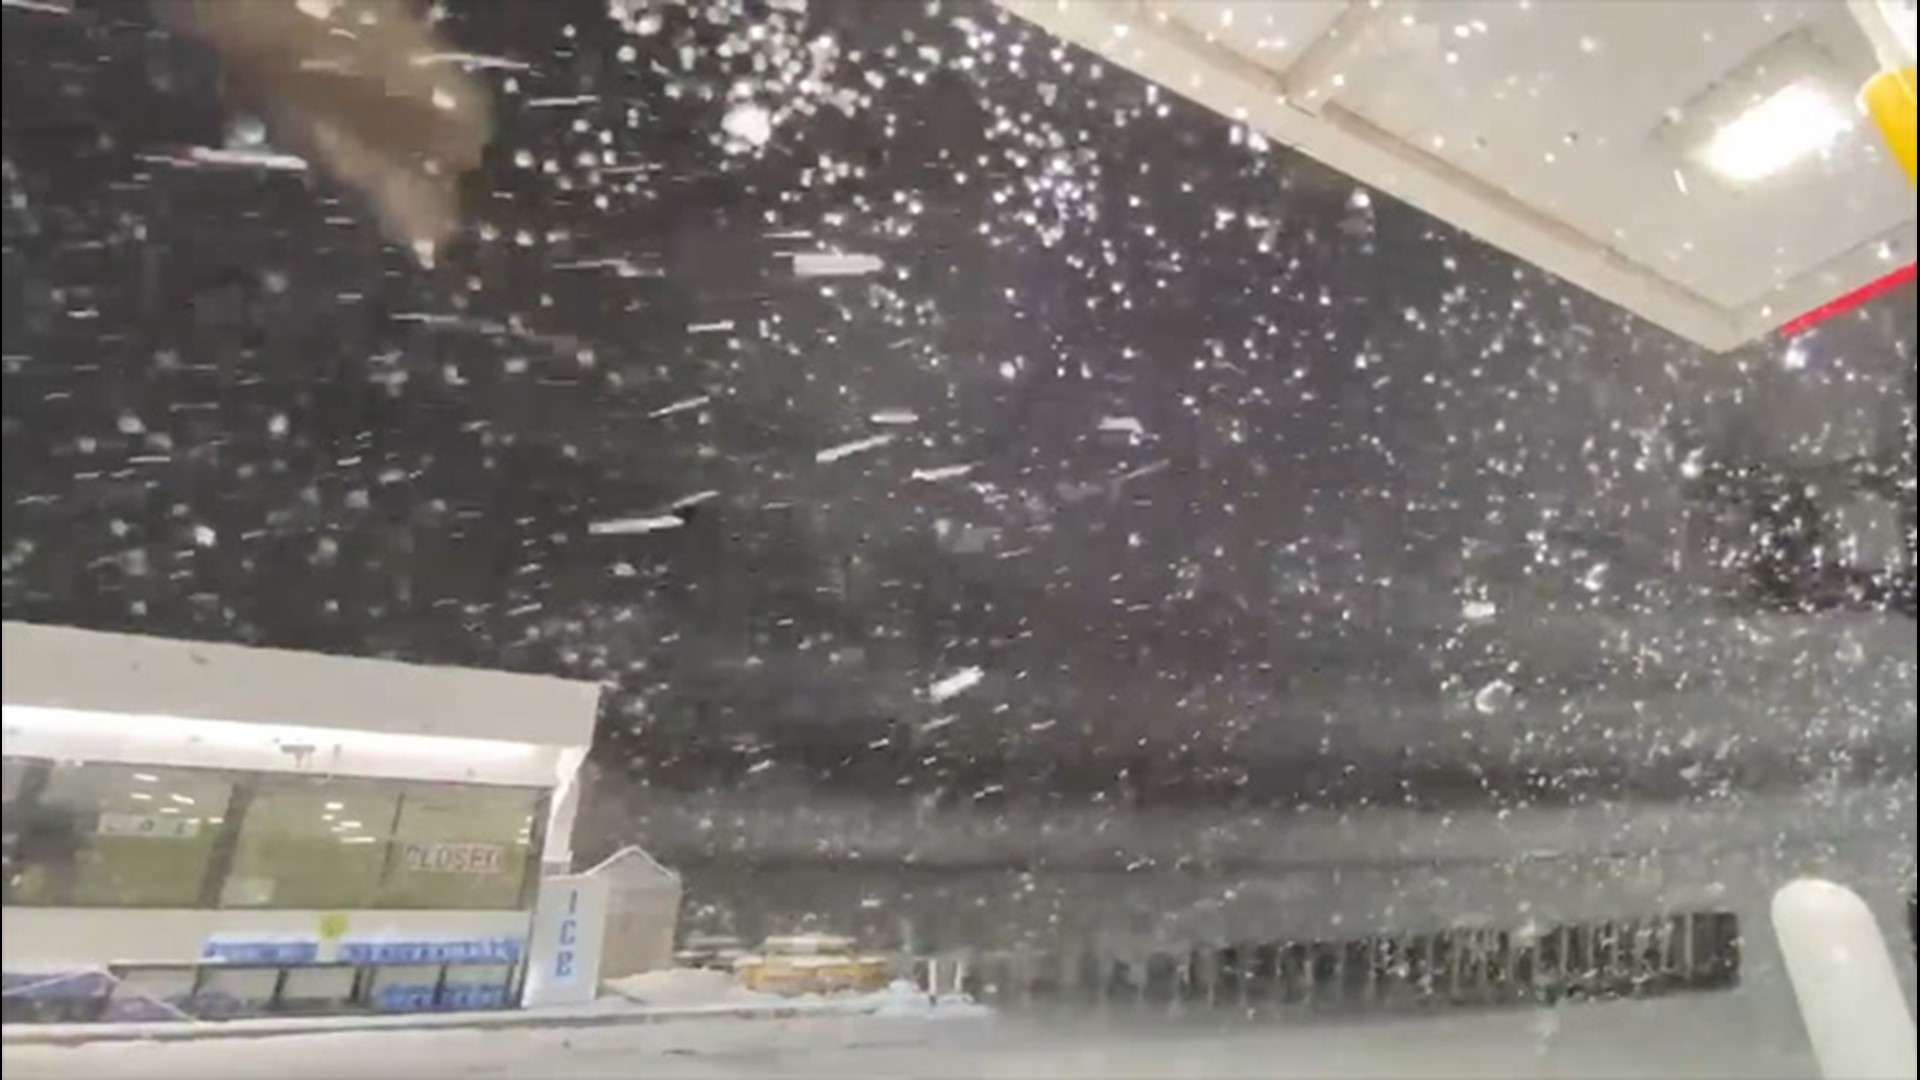 As this videographer pushed north in Benton Harbor, Michigan, on Jan. 19, they were hit with heavy snow while stopped at a gas station.